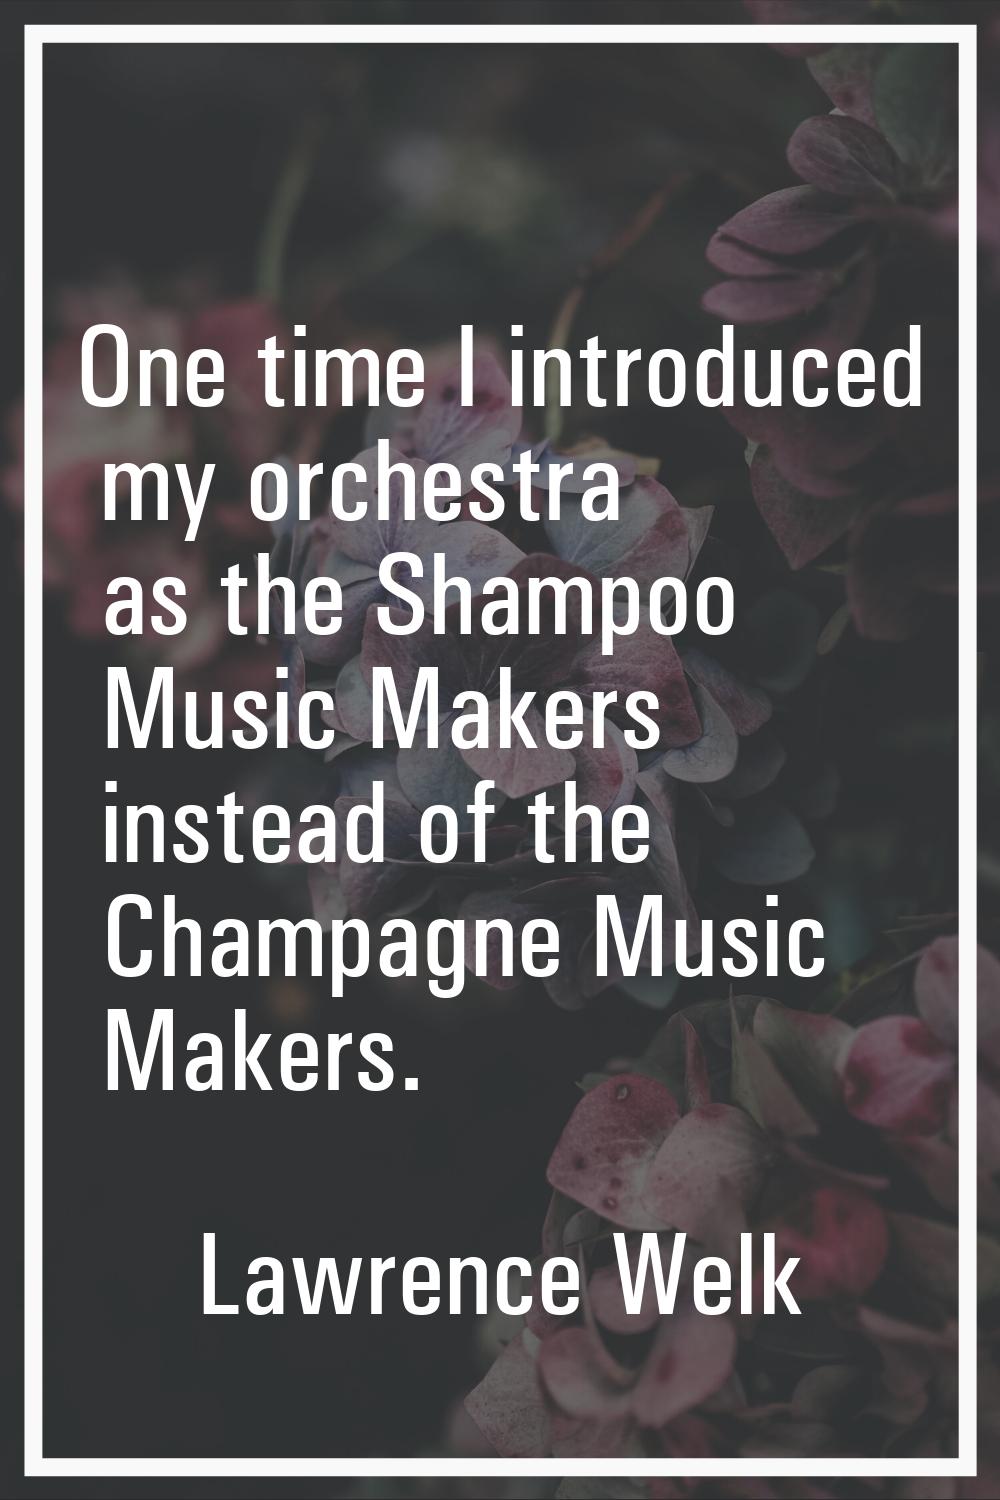 One time I introduced my orchestra as the Shampoo Music Makers instead of the Champagne Music Maker